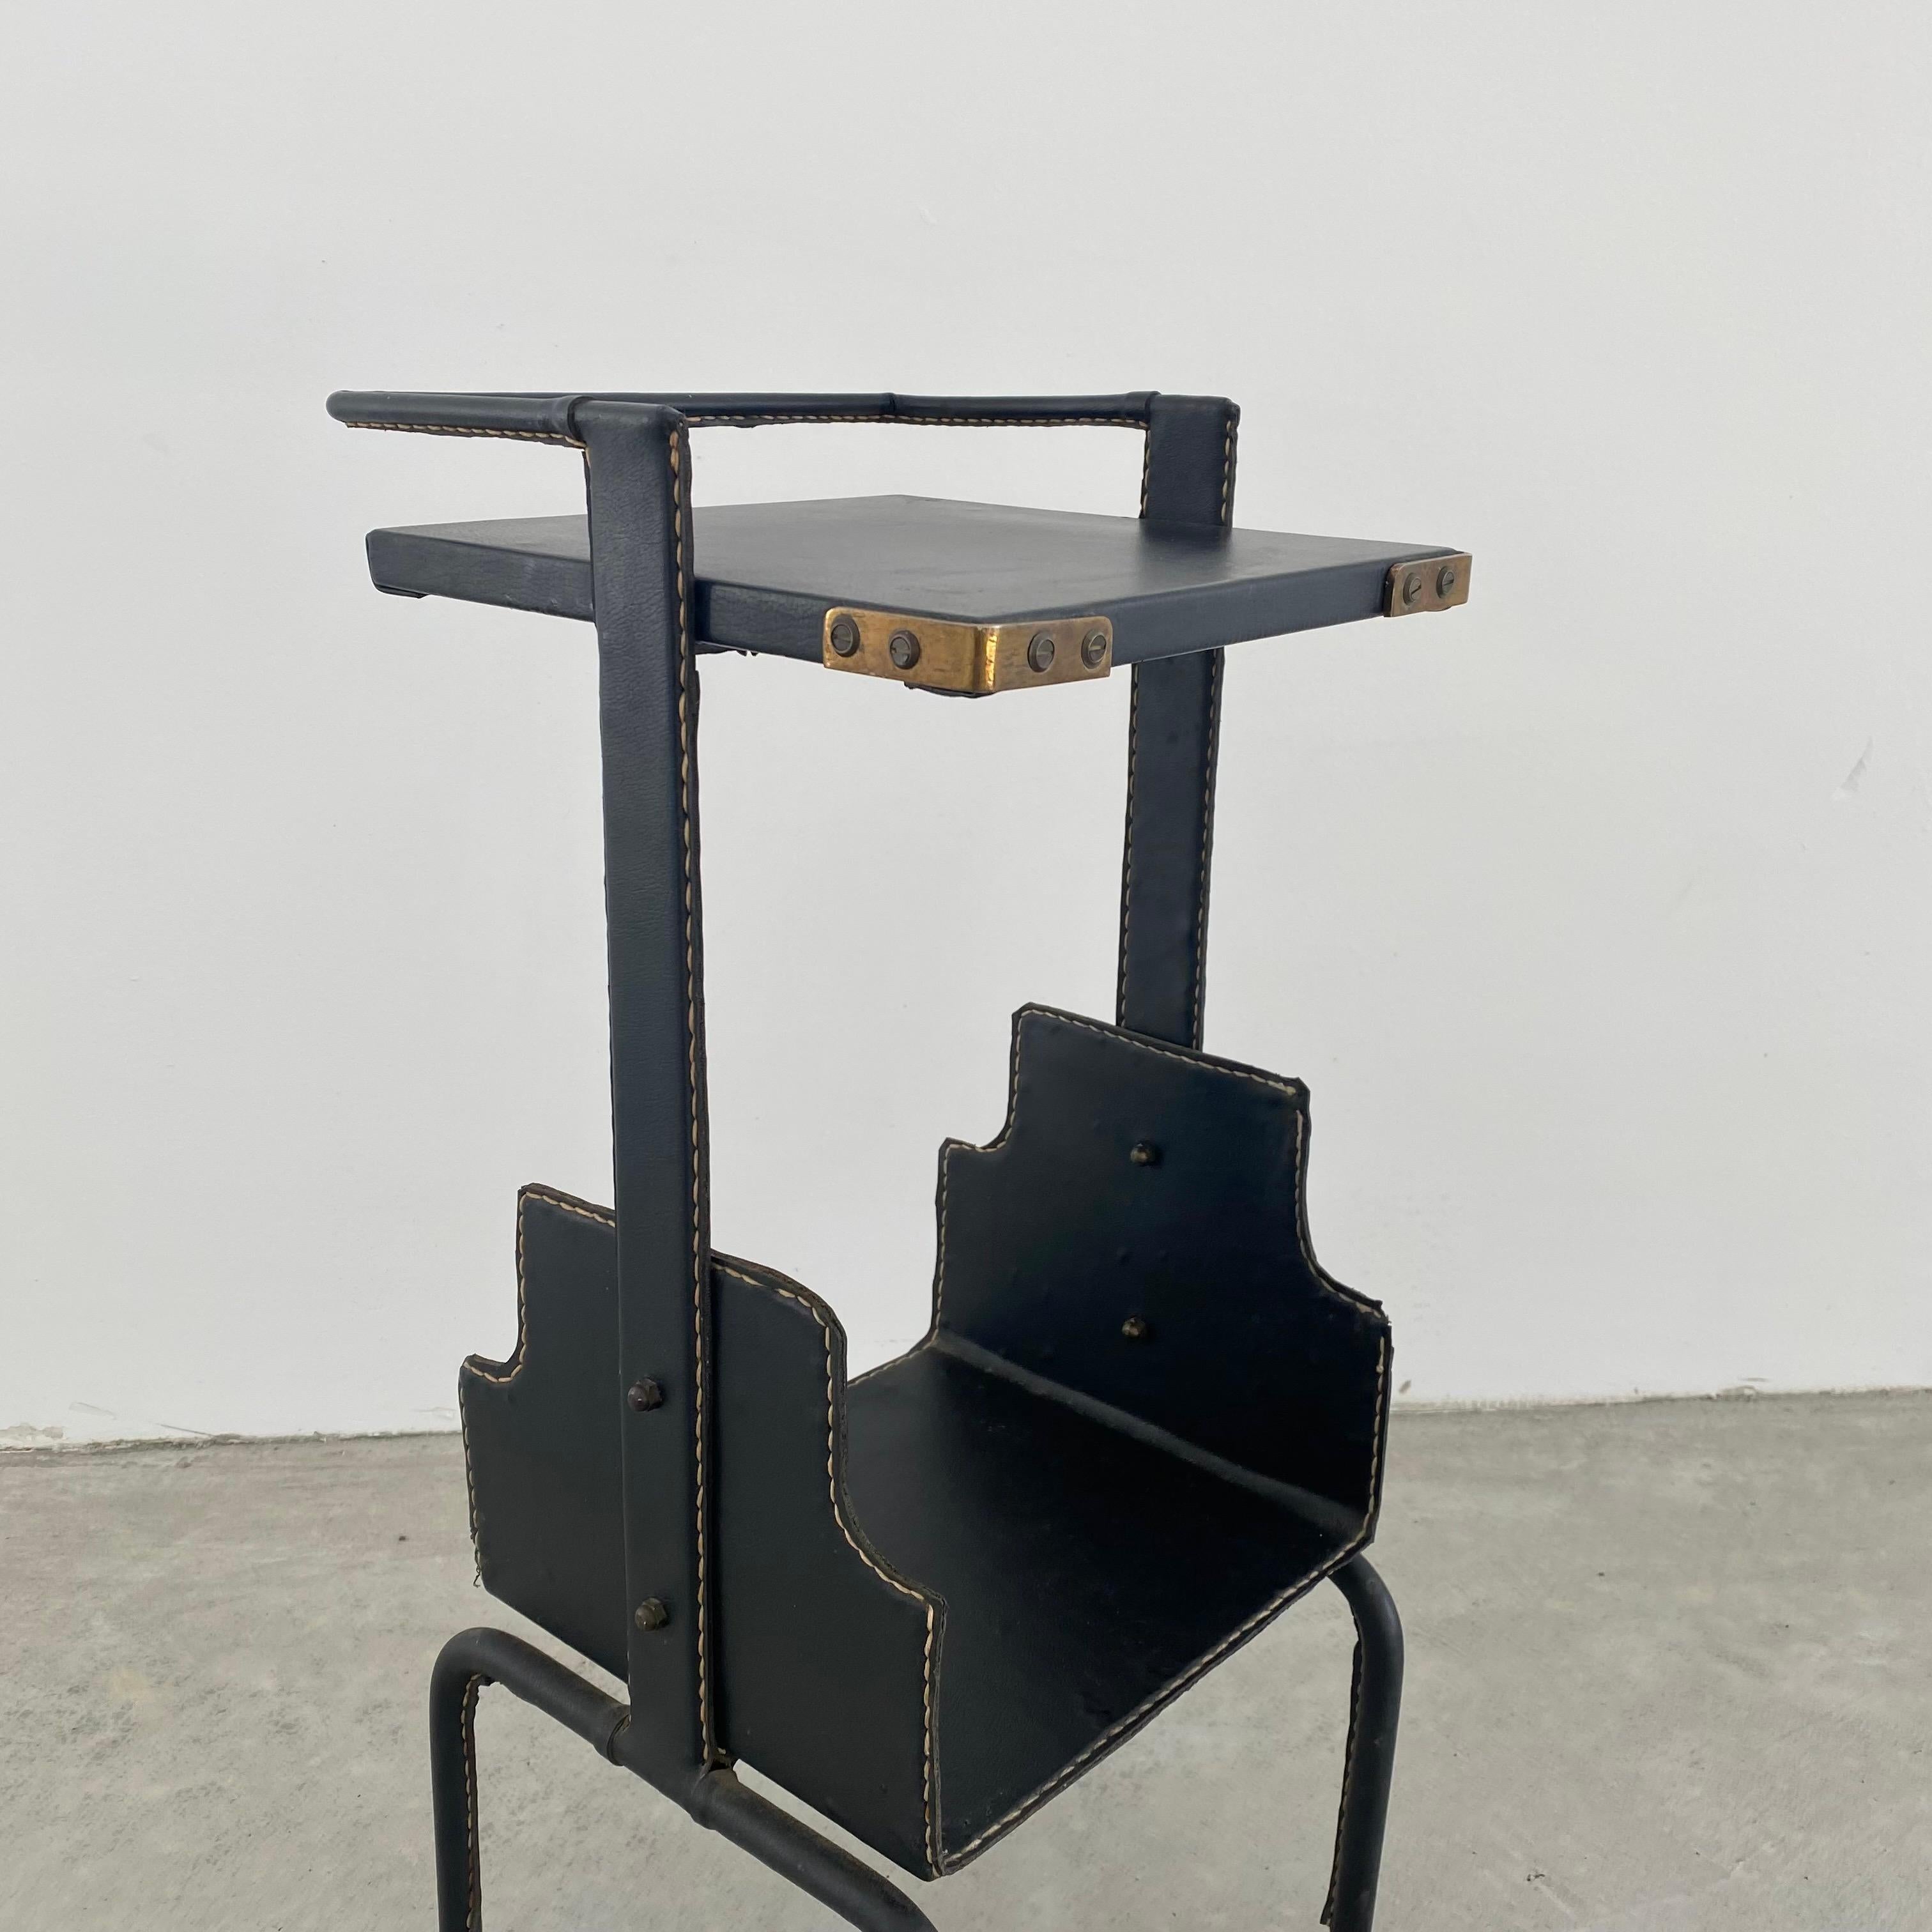 Stunning leather side table by Jacques Adnet. Completely wrapped leather frame with tabletop and lower shelf. Signature Adnet contrast stitching. Brass ball feet and brass corners. Great vintage condition. Super functional piece. Perfect piece of